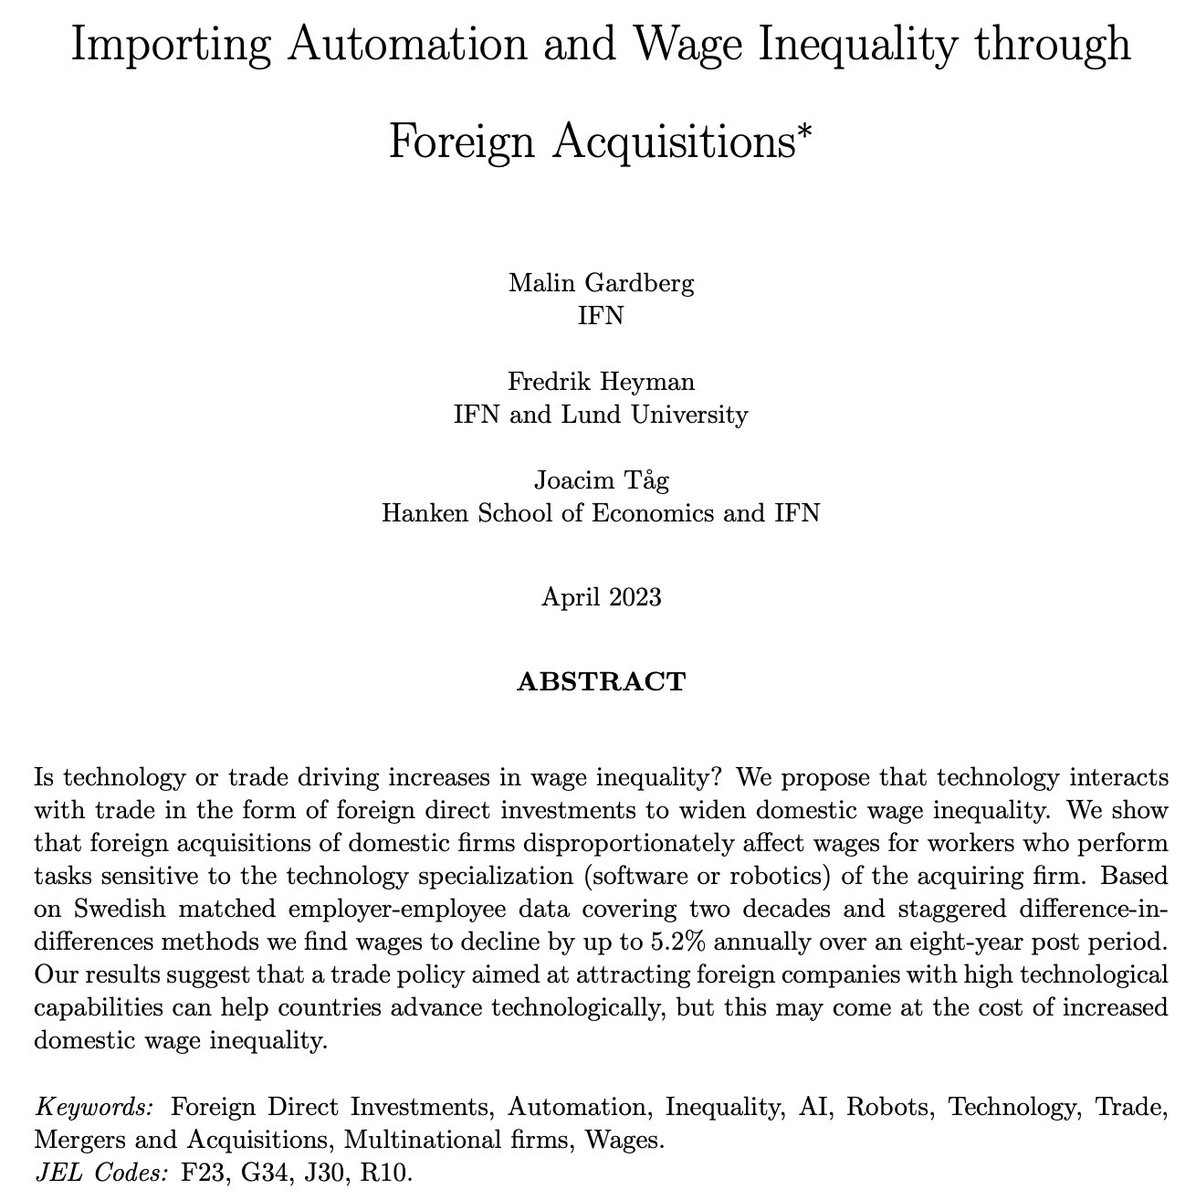 🚀New working paper on #WageInequality out! Our study explores how tech transfer via foreign acquisitions affects domestic wage inequality. We find that foreign acquisitions impact domestic wages based on the tech intensity of the acquiring firm. ssrn.com/abstract=44121… 👇 (1/3)